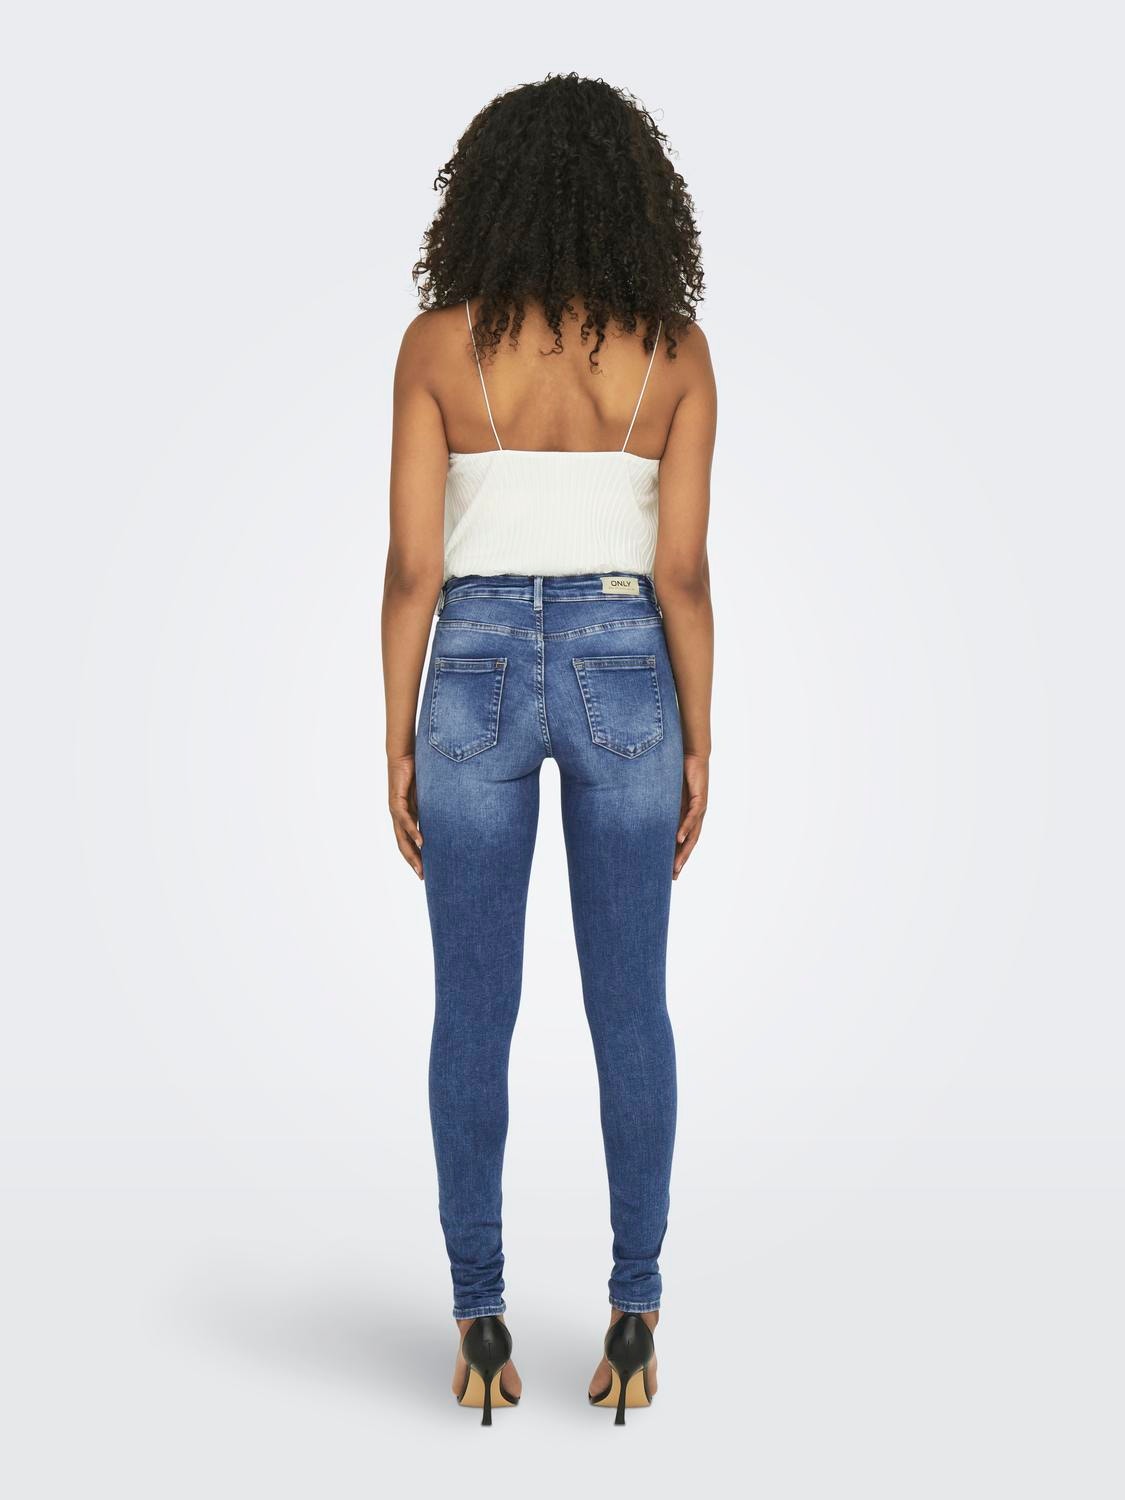 ONLY Jeans Skinny Fit Taille moyenne -Medium Blue Denim - 15225794